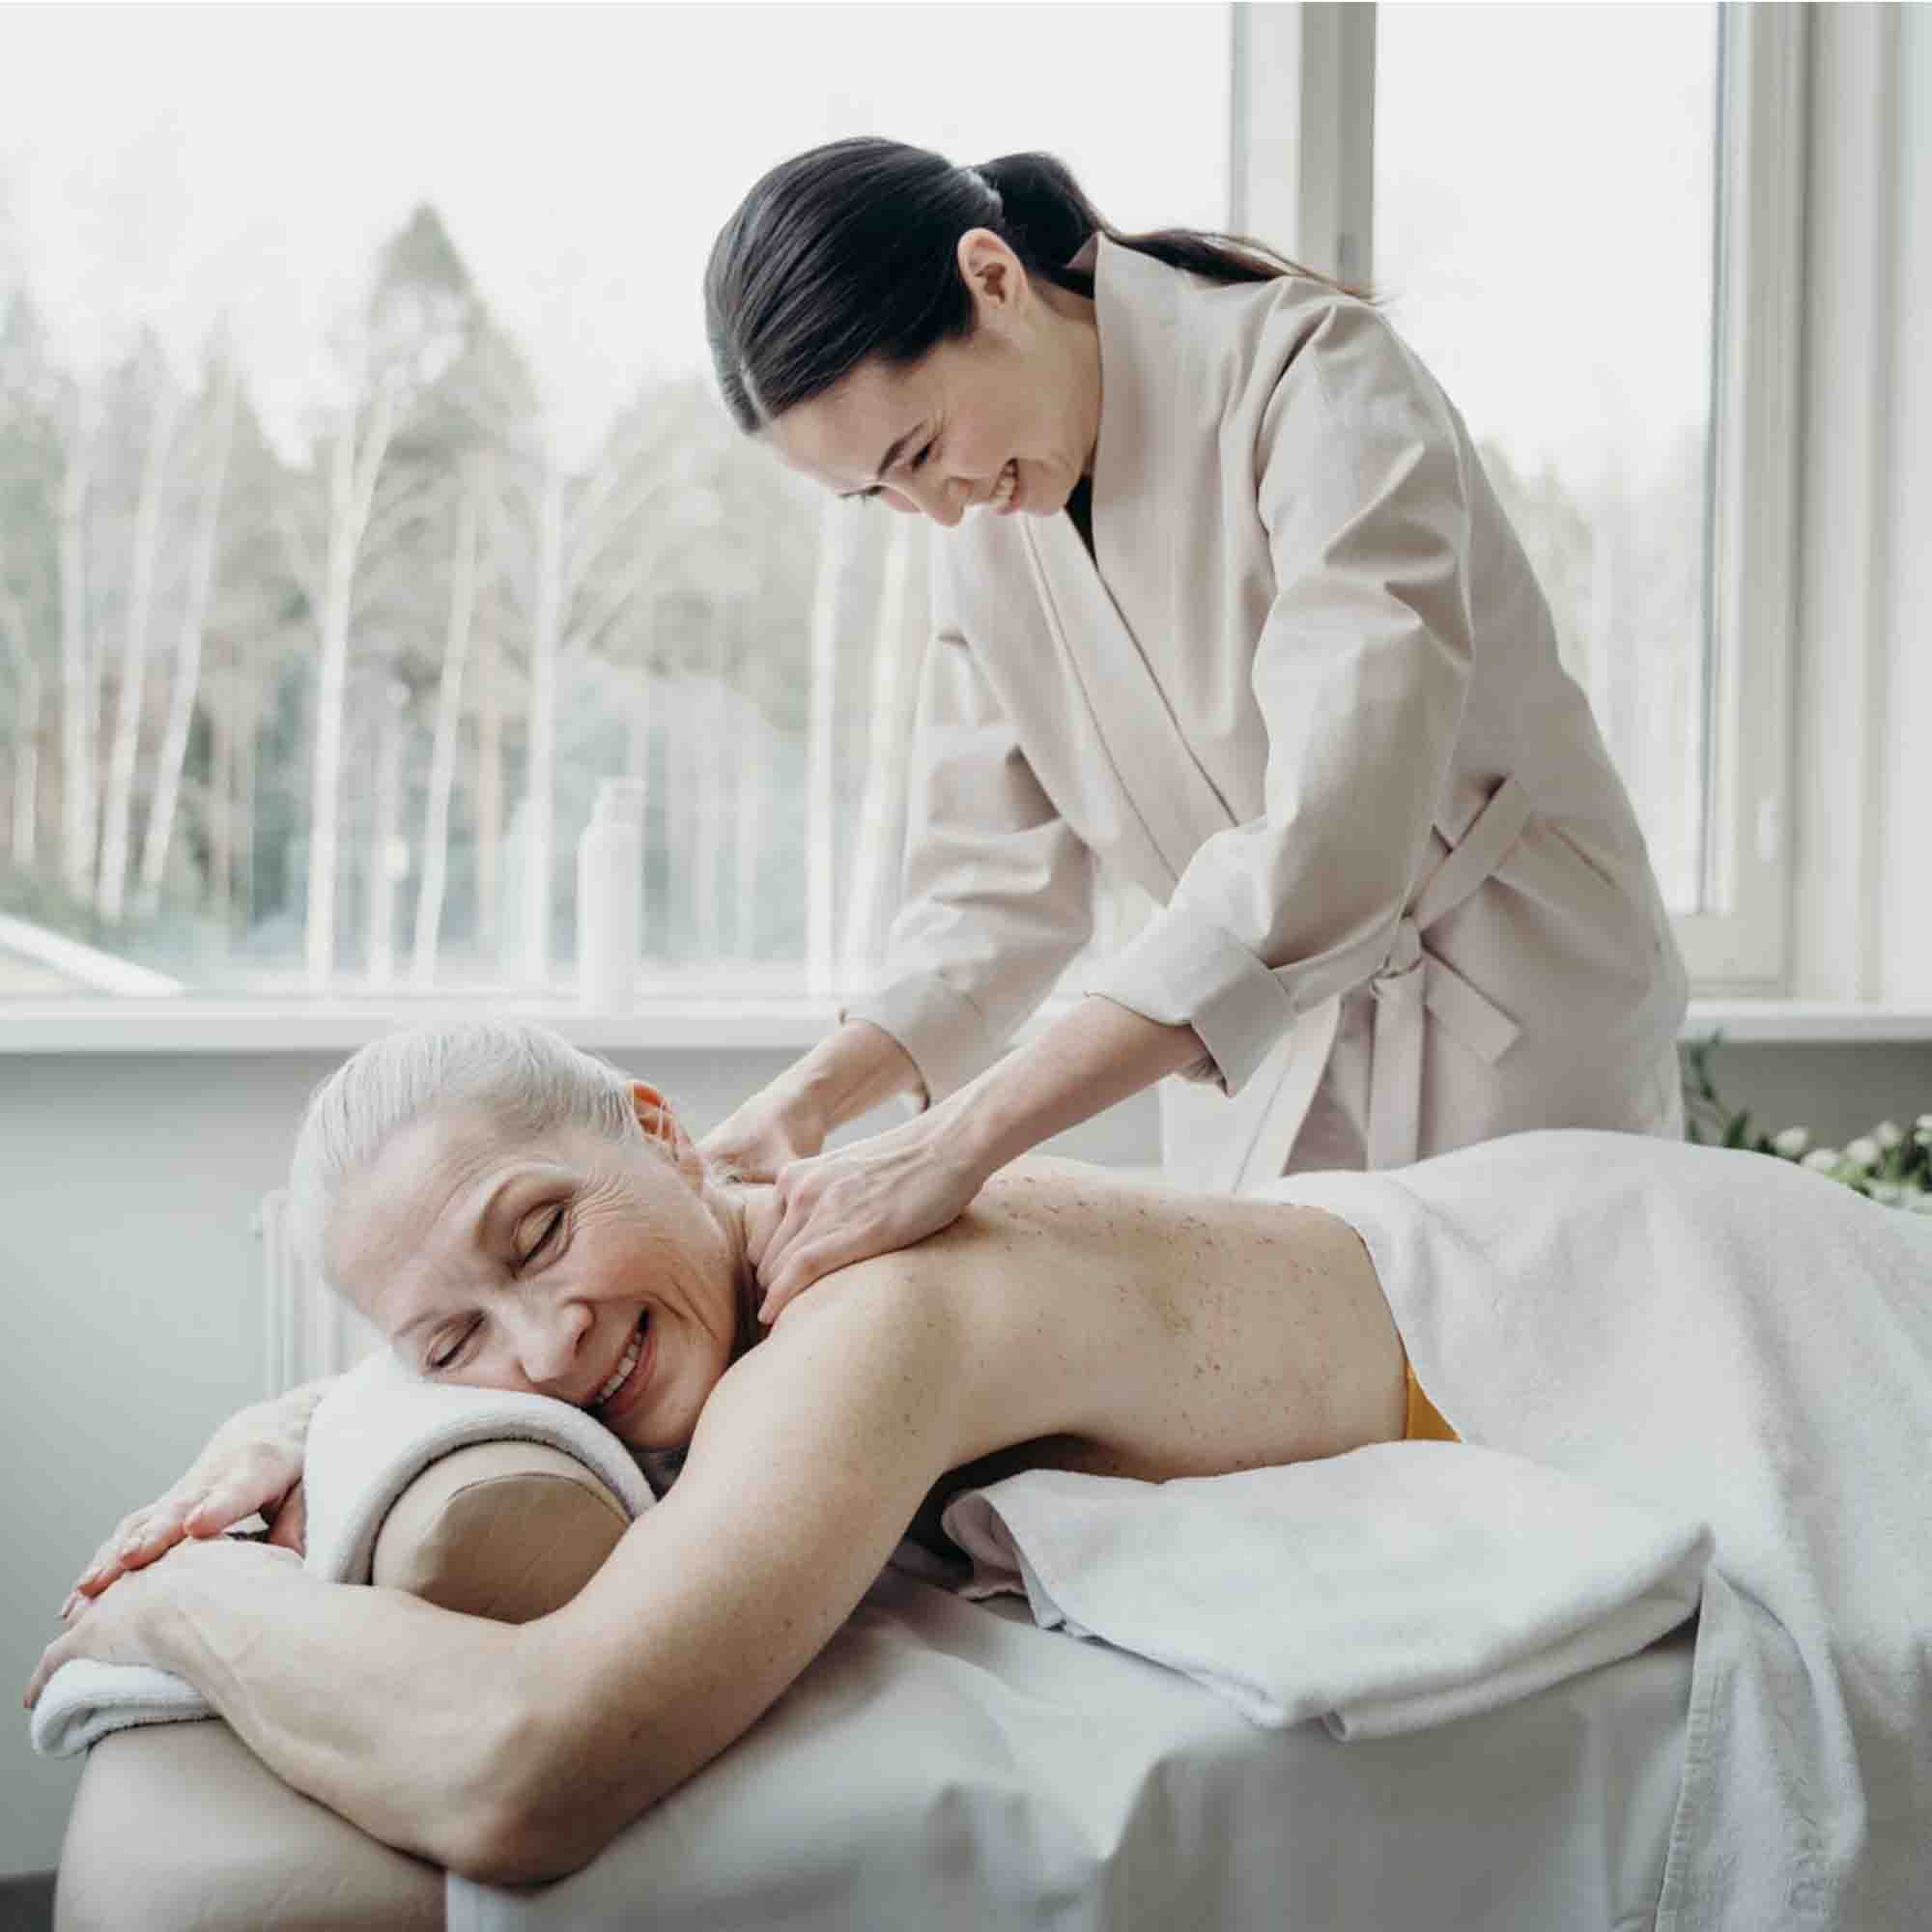 elderly getting our aged care massage